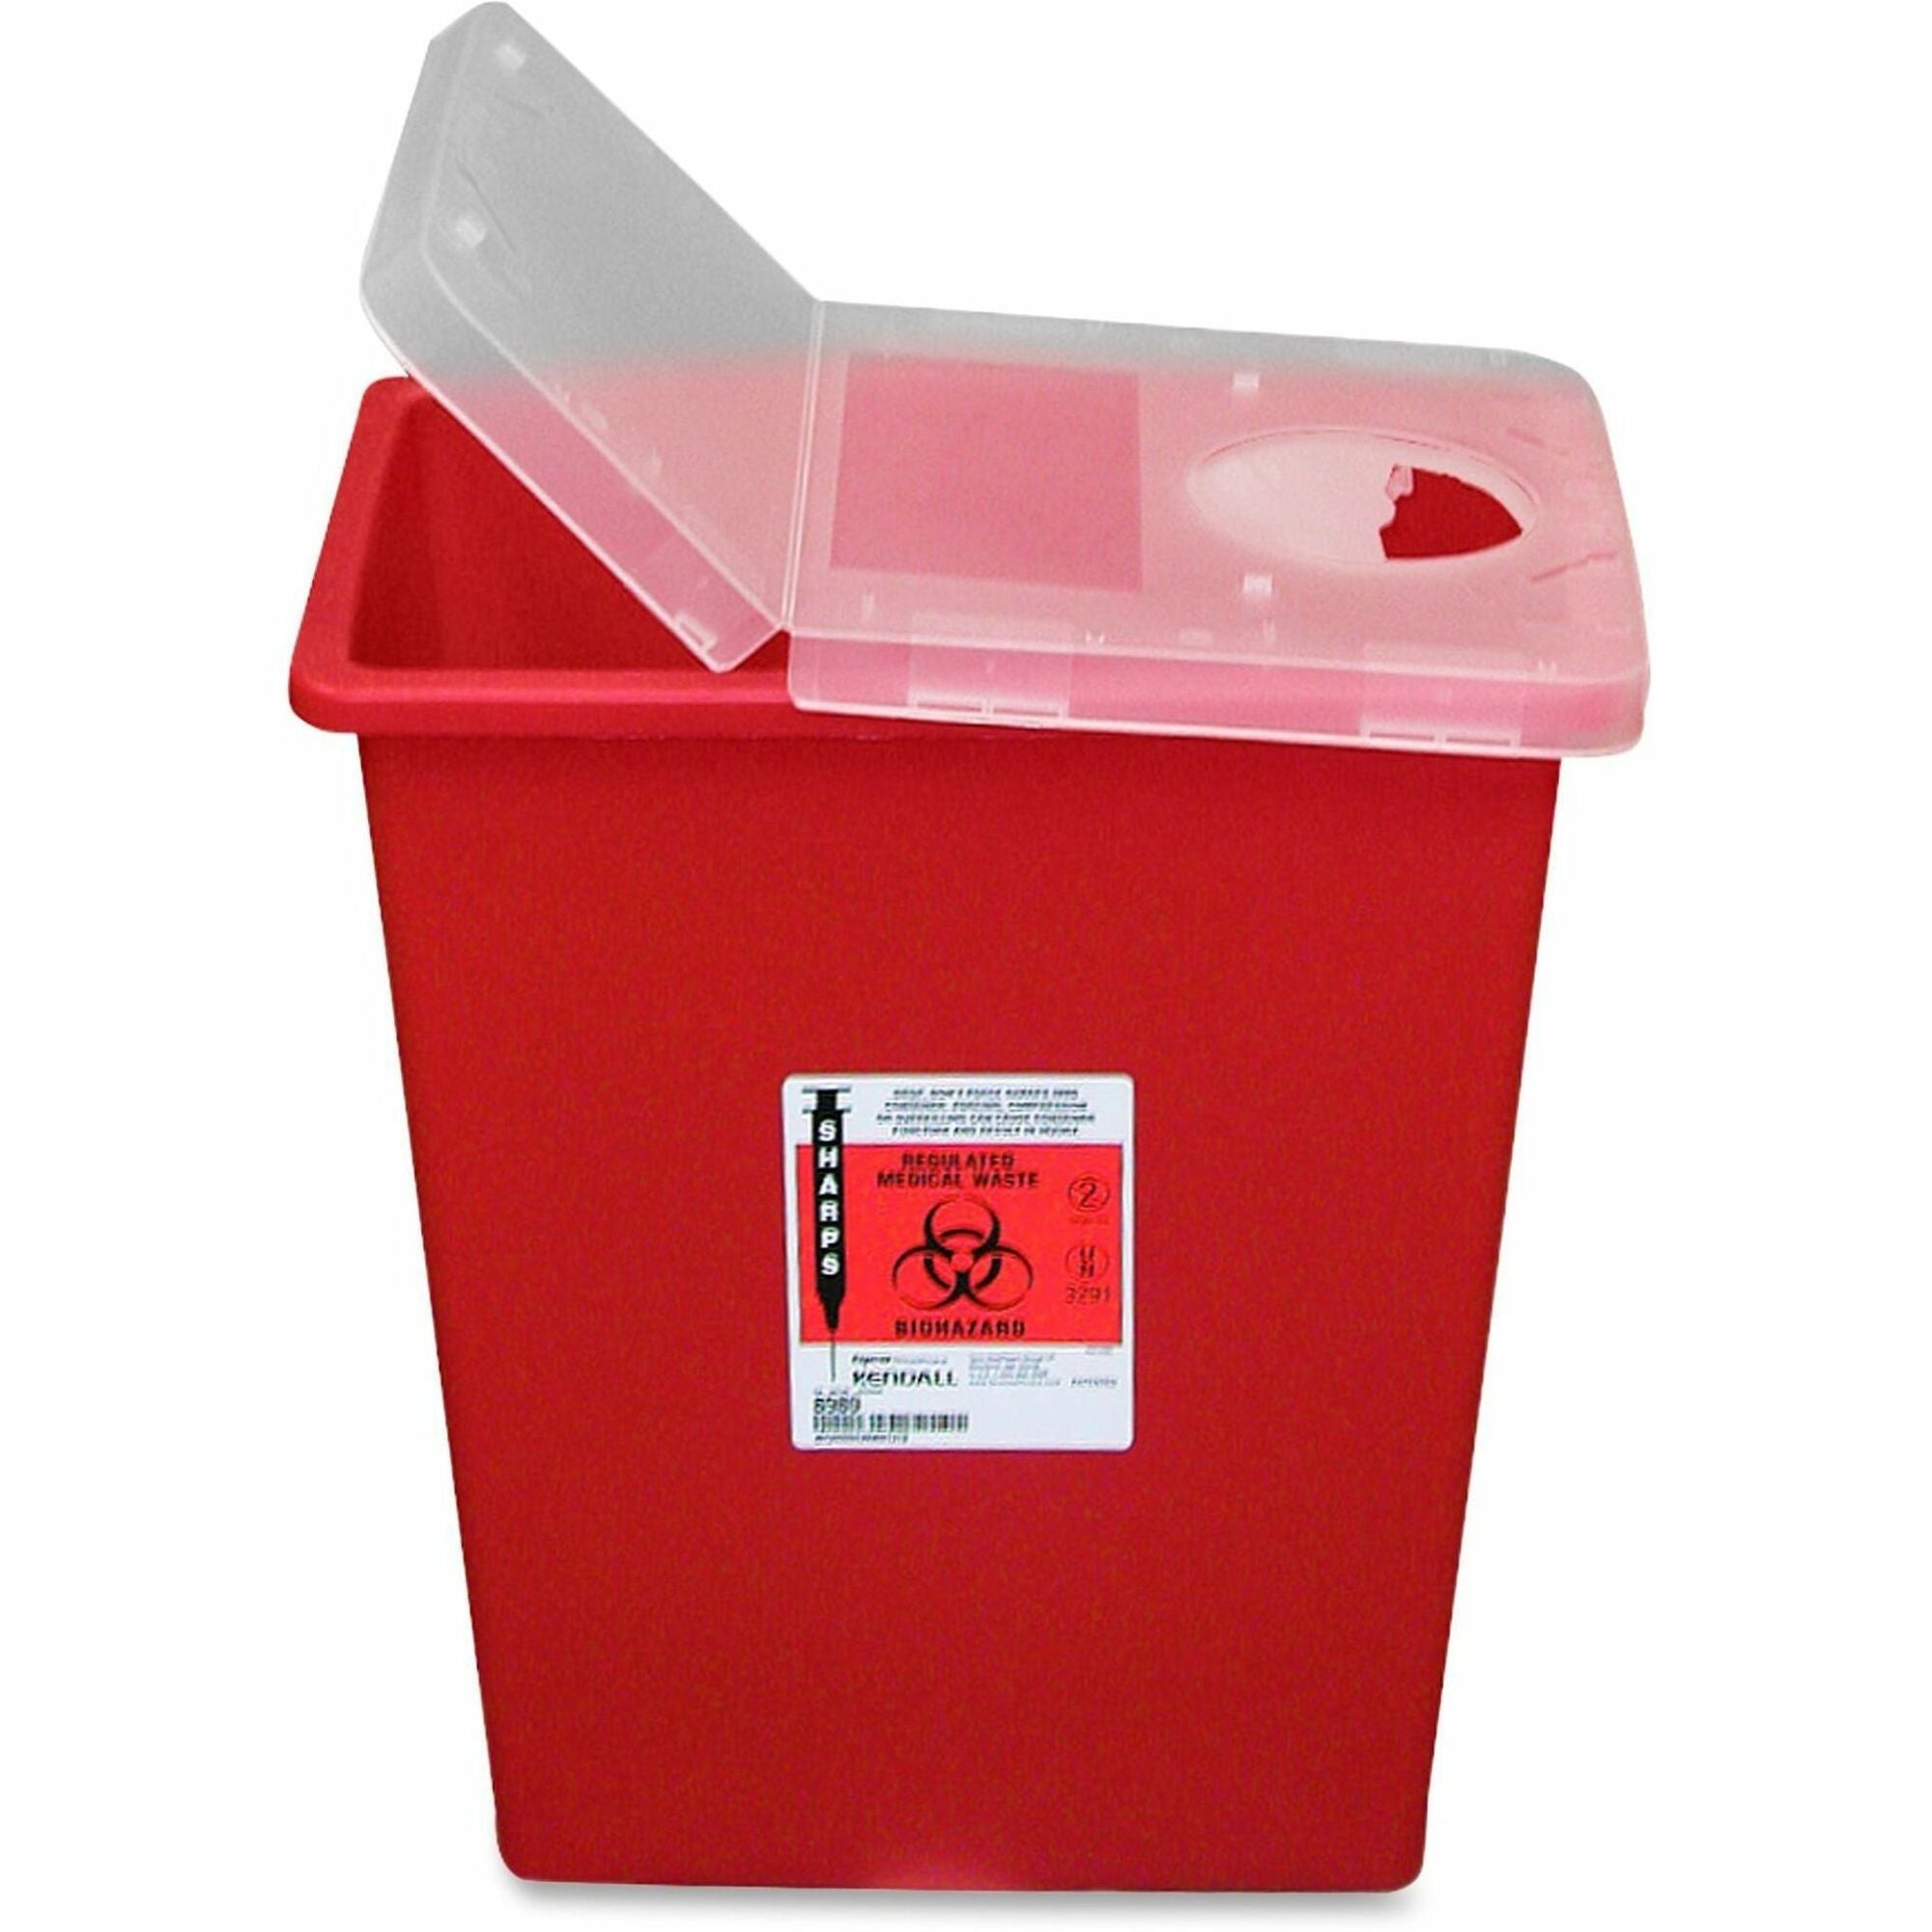 Covidien Kendall Sharps Containers with Hinged Lid - 8 gal Capacity - 17.5" Height x 15.5" Width x 11" Depth - Red - 1 Each - 